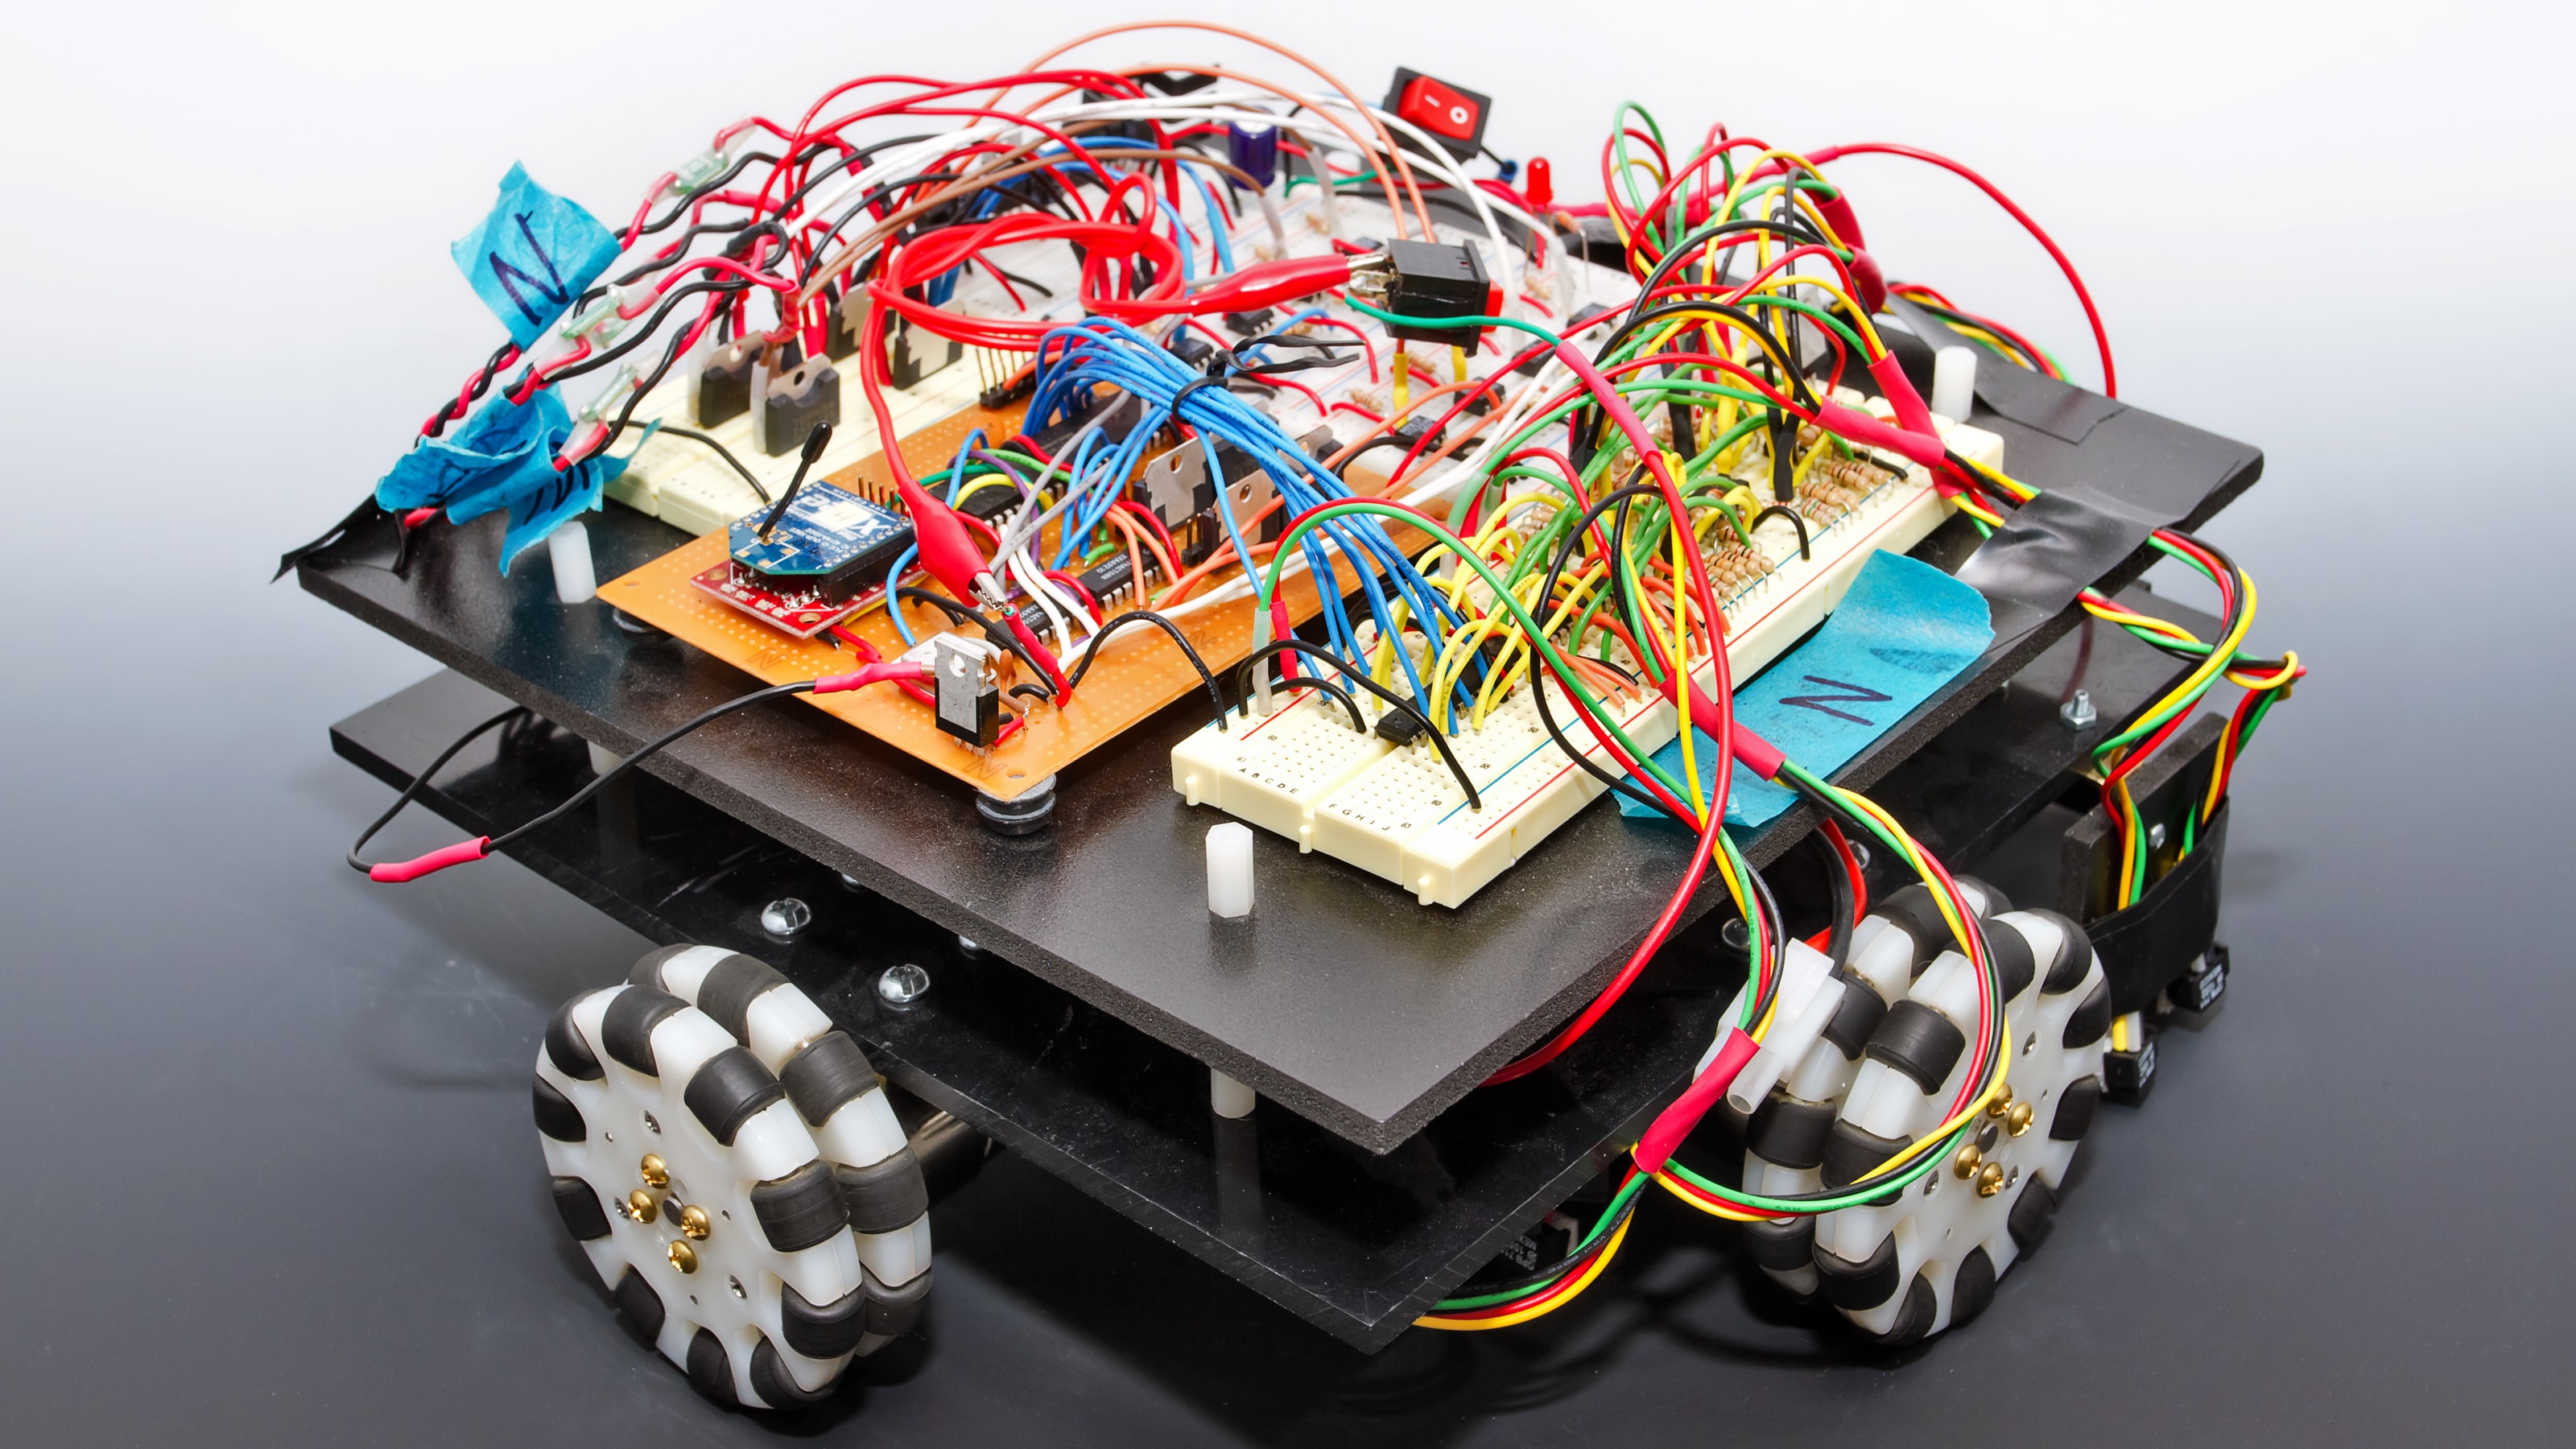 A square robot with exposed circuitry and black and white wheels.